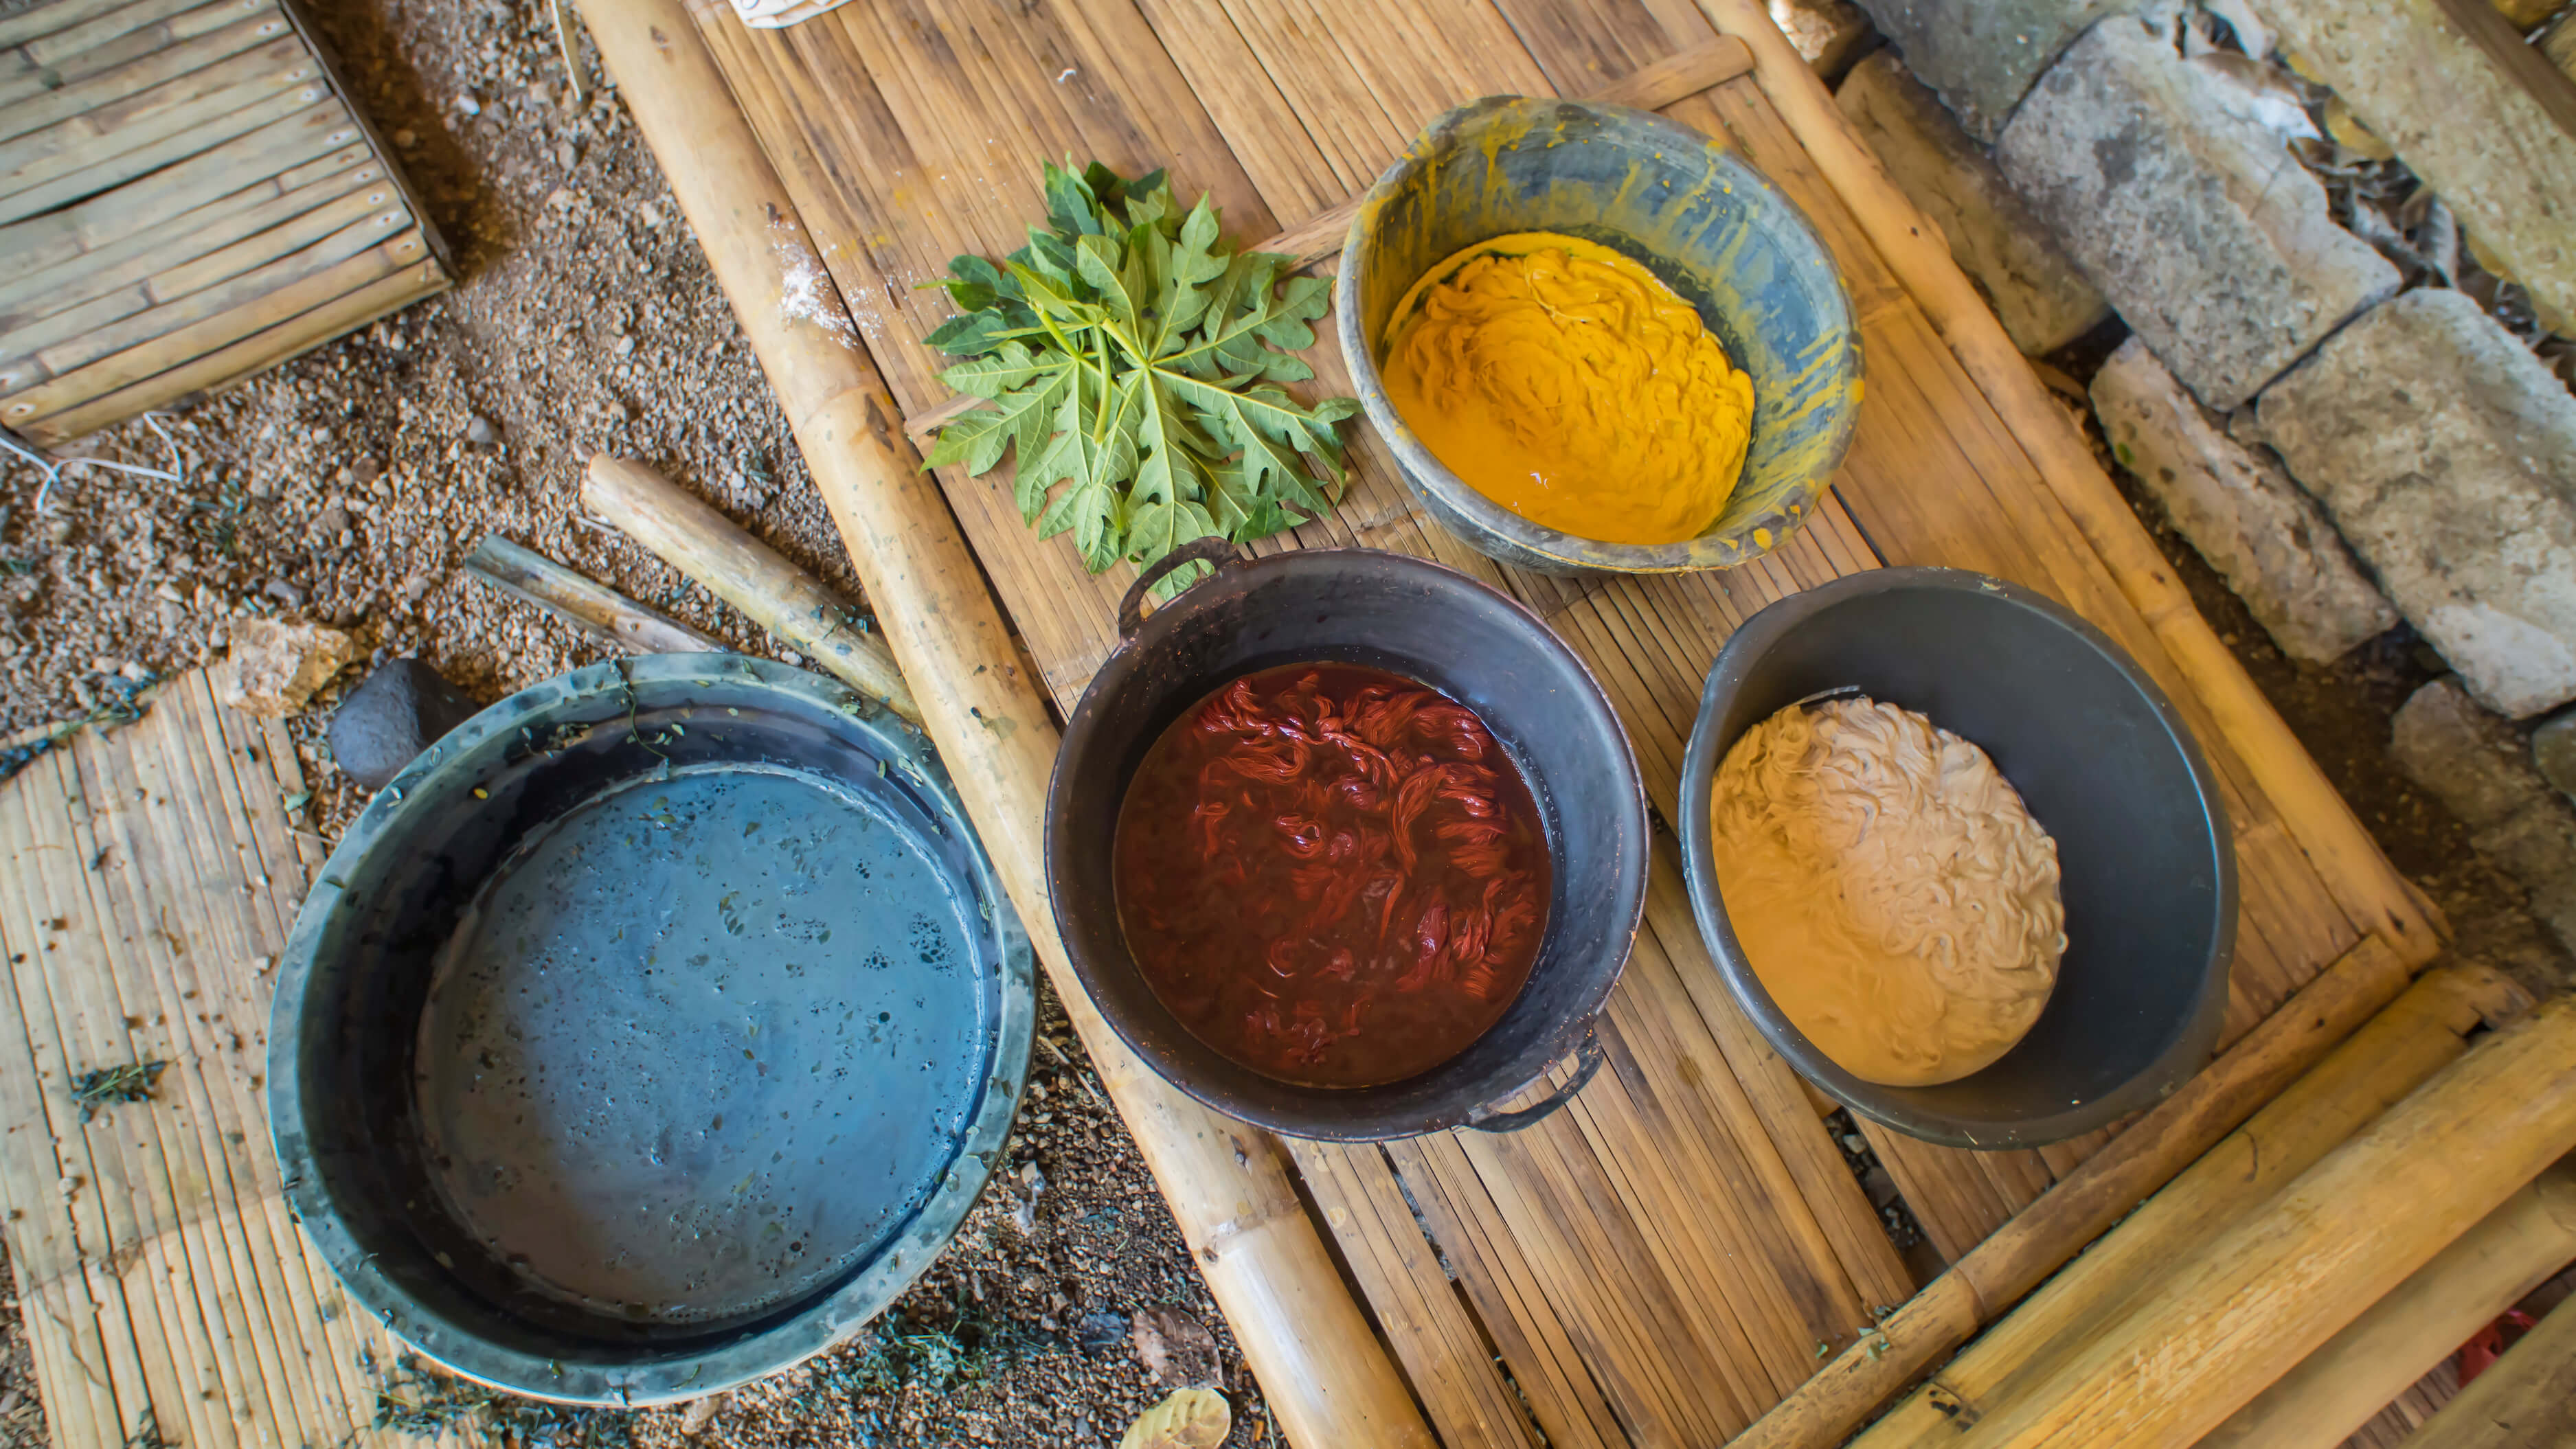 Bowls of colourful dye derived naturally from plants, such as tumeric (yellow), indigo and morinda roots (red). Photo by Andra Fembriarto